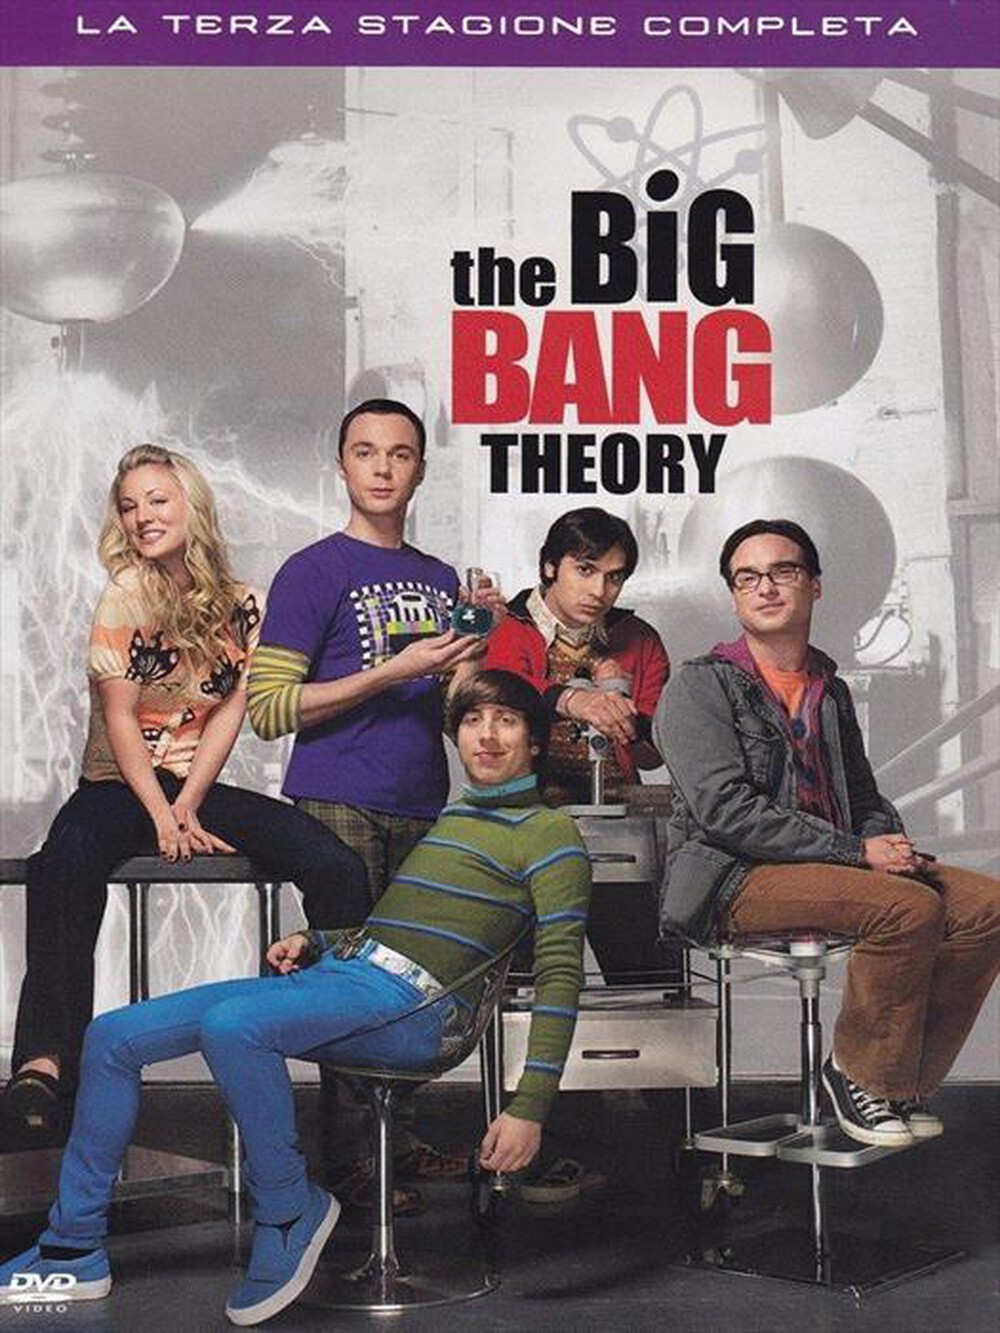 "WARNER HOME VIDEO - Big Bang Theory (The) - Stagione 03 (3 Dvd)"